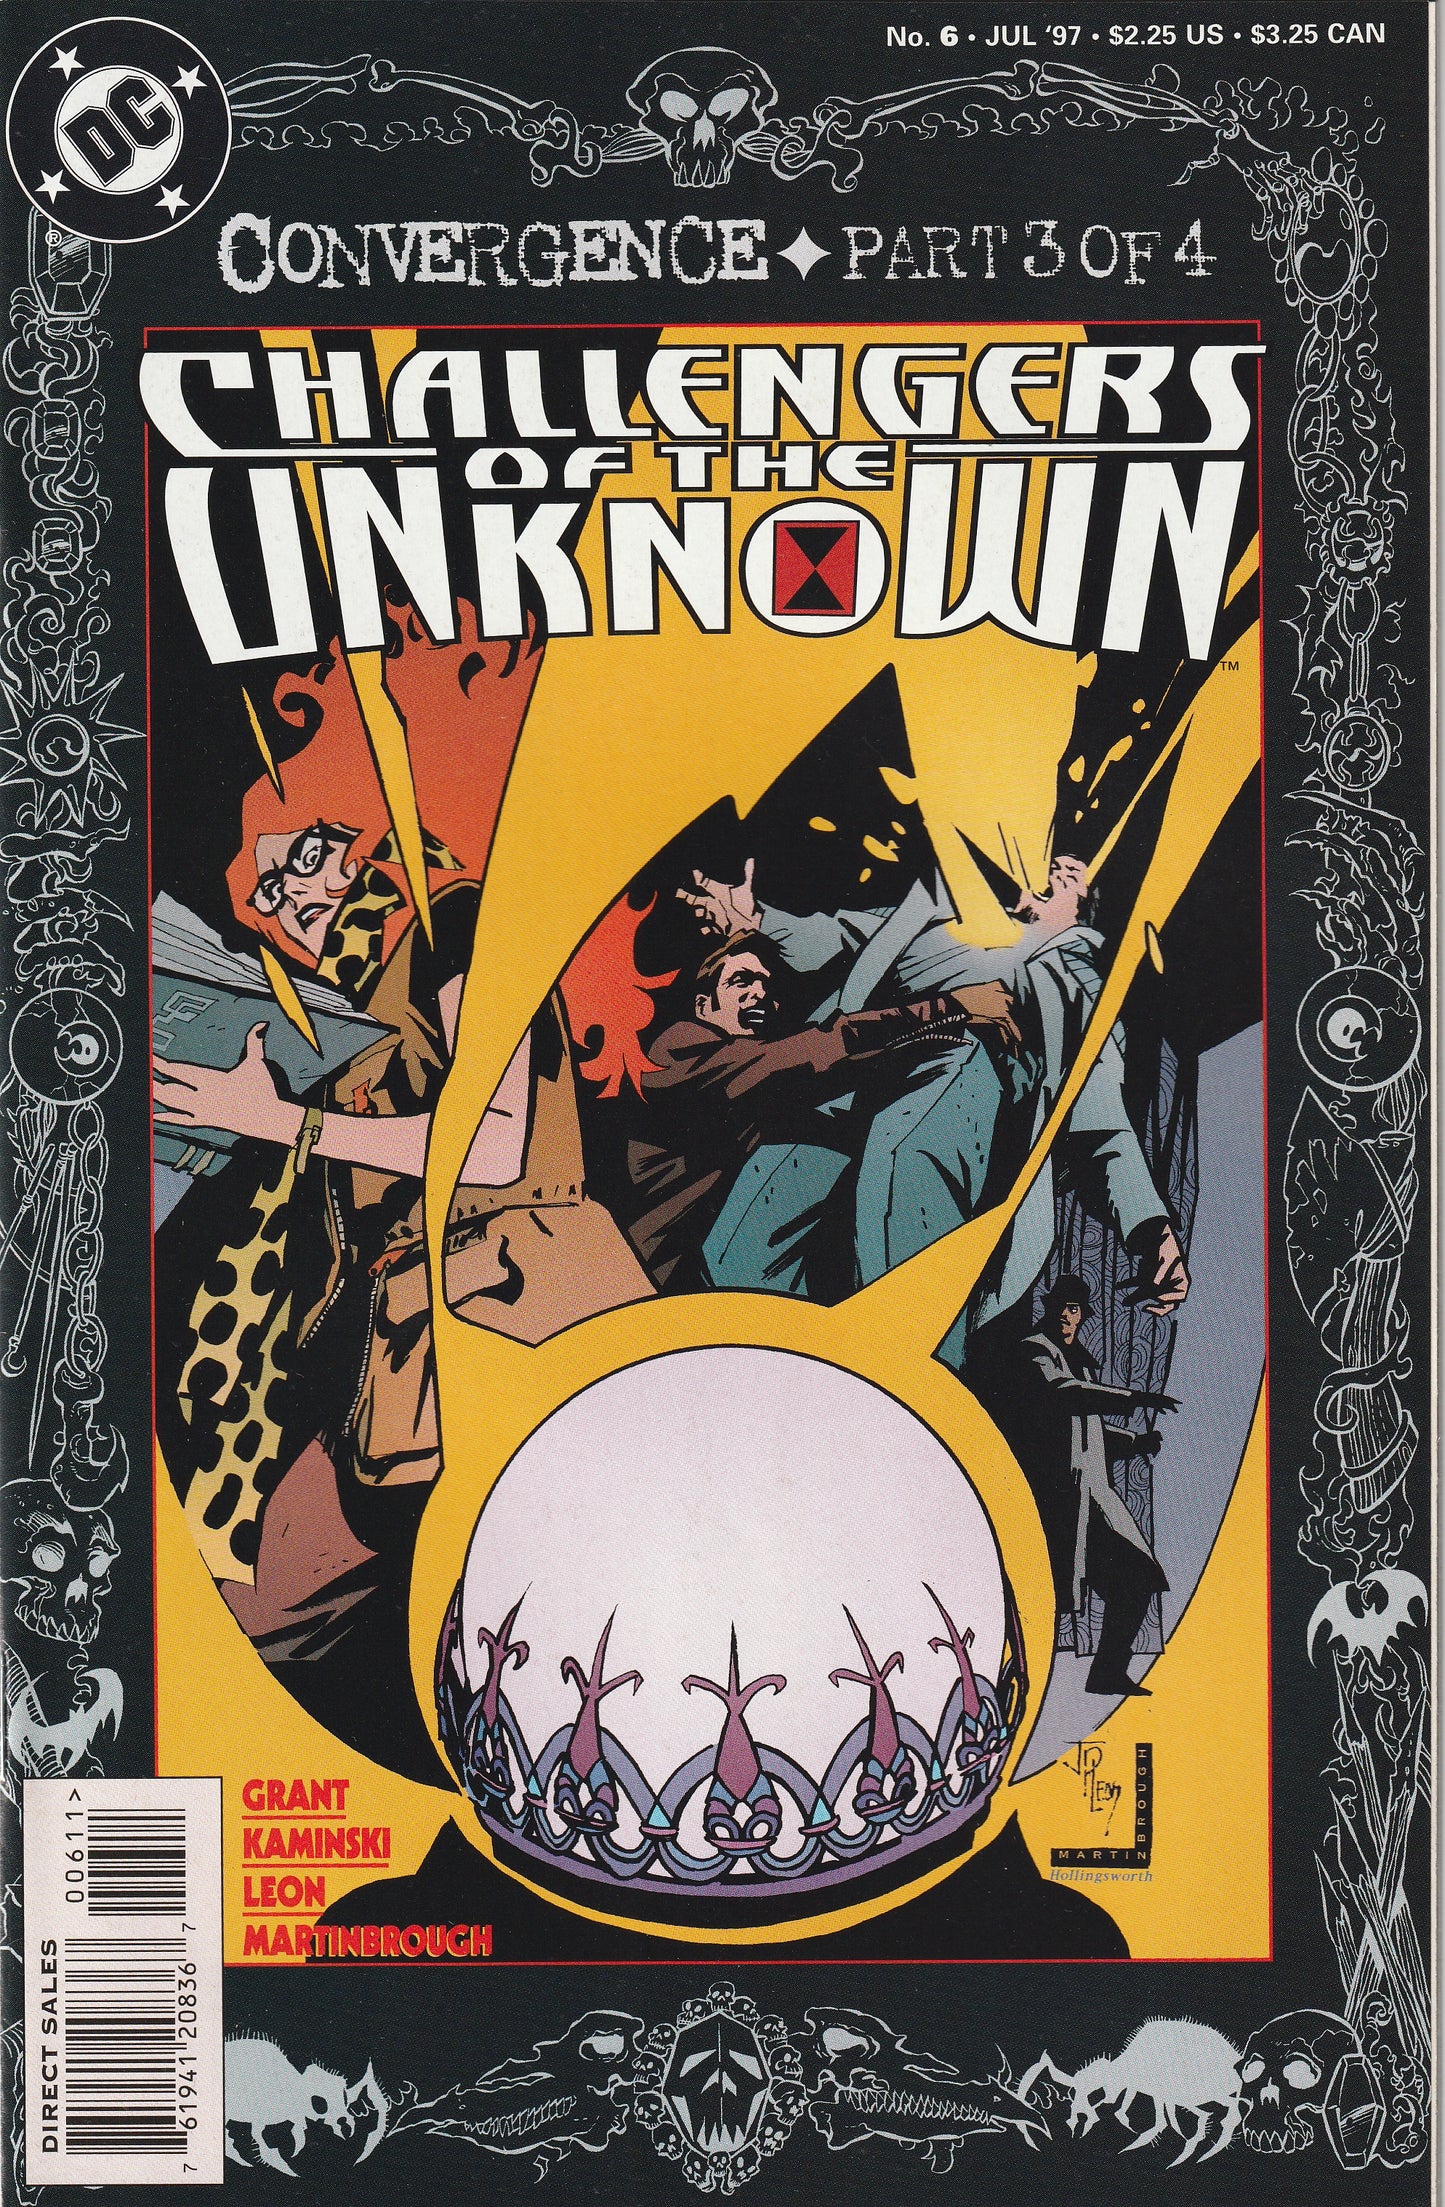 Challengers of the Unknown #6 (1997) - Convergence Part 3